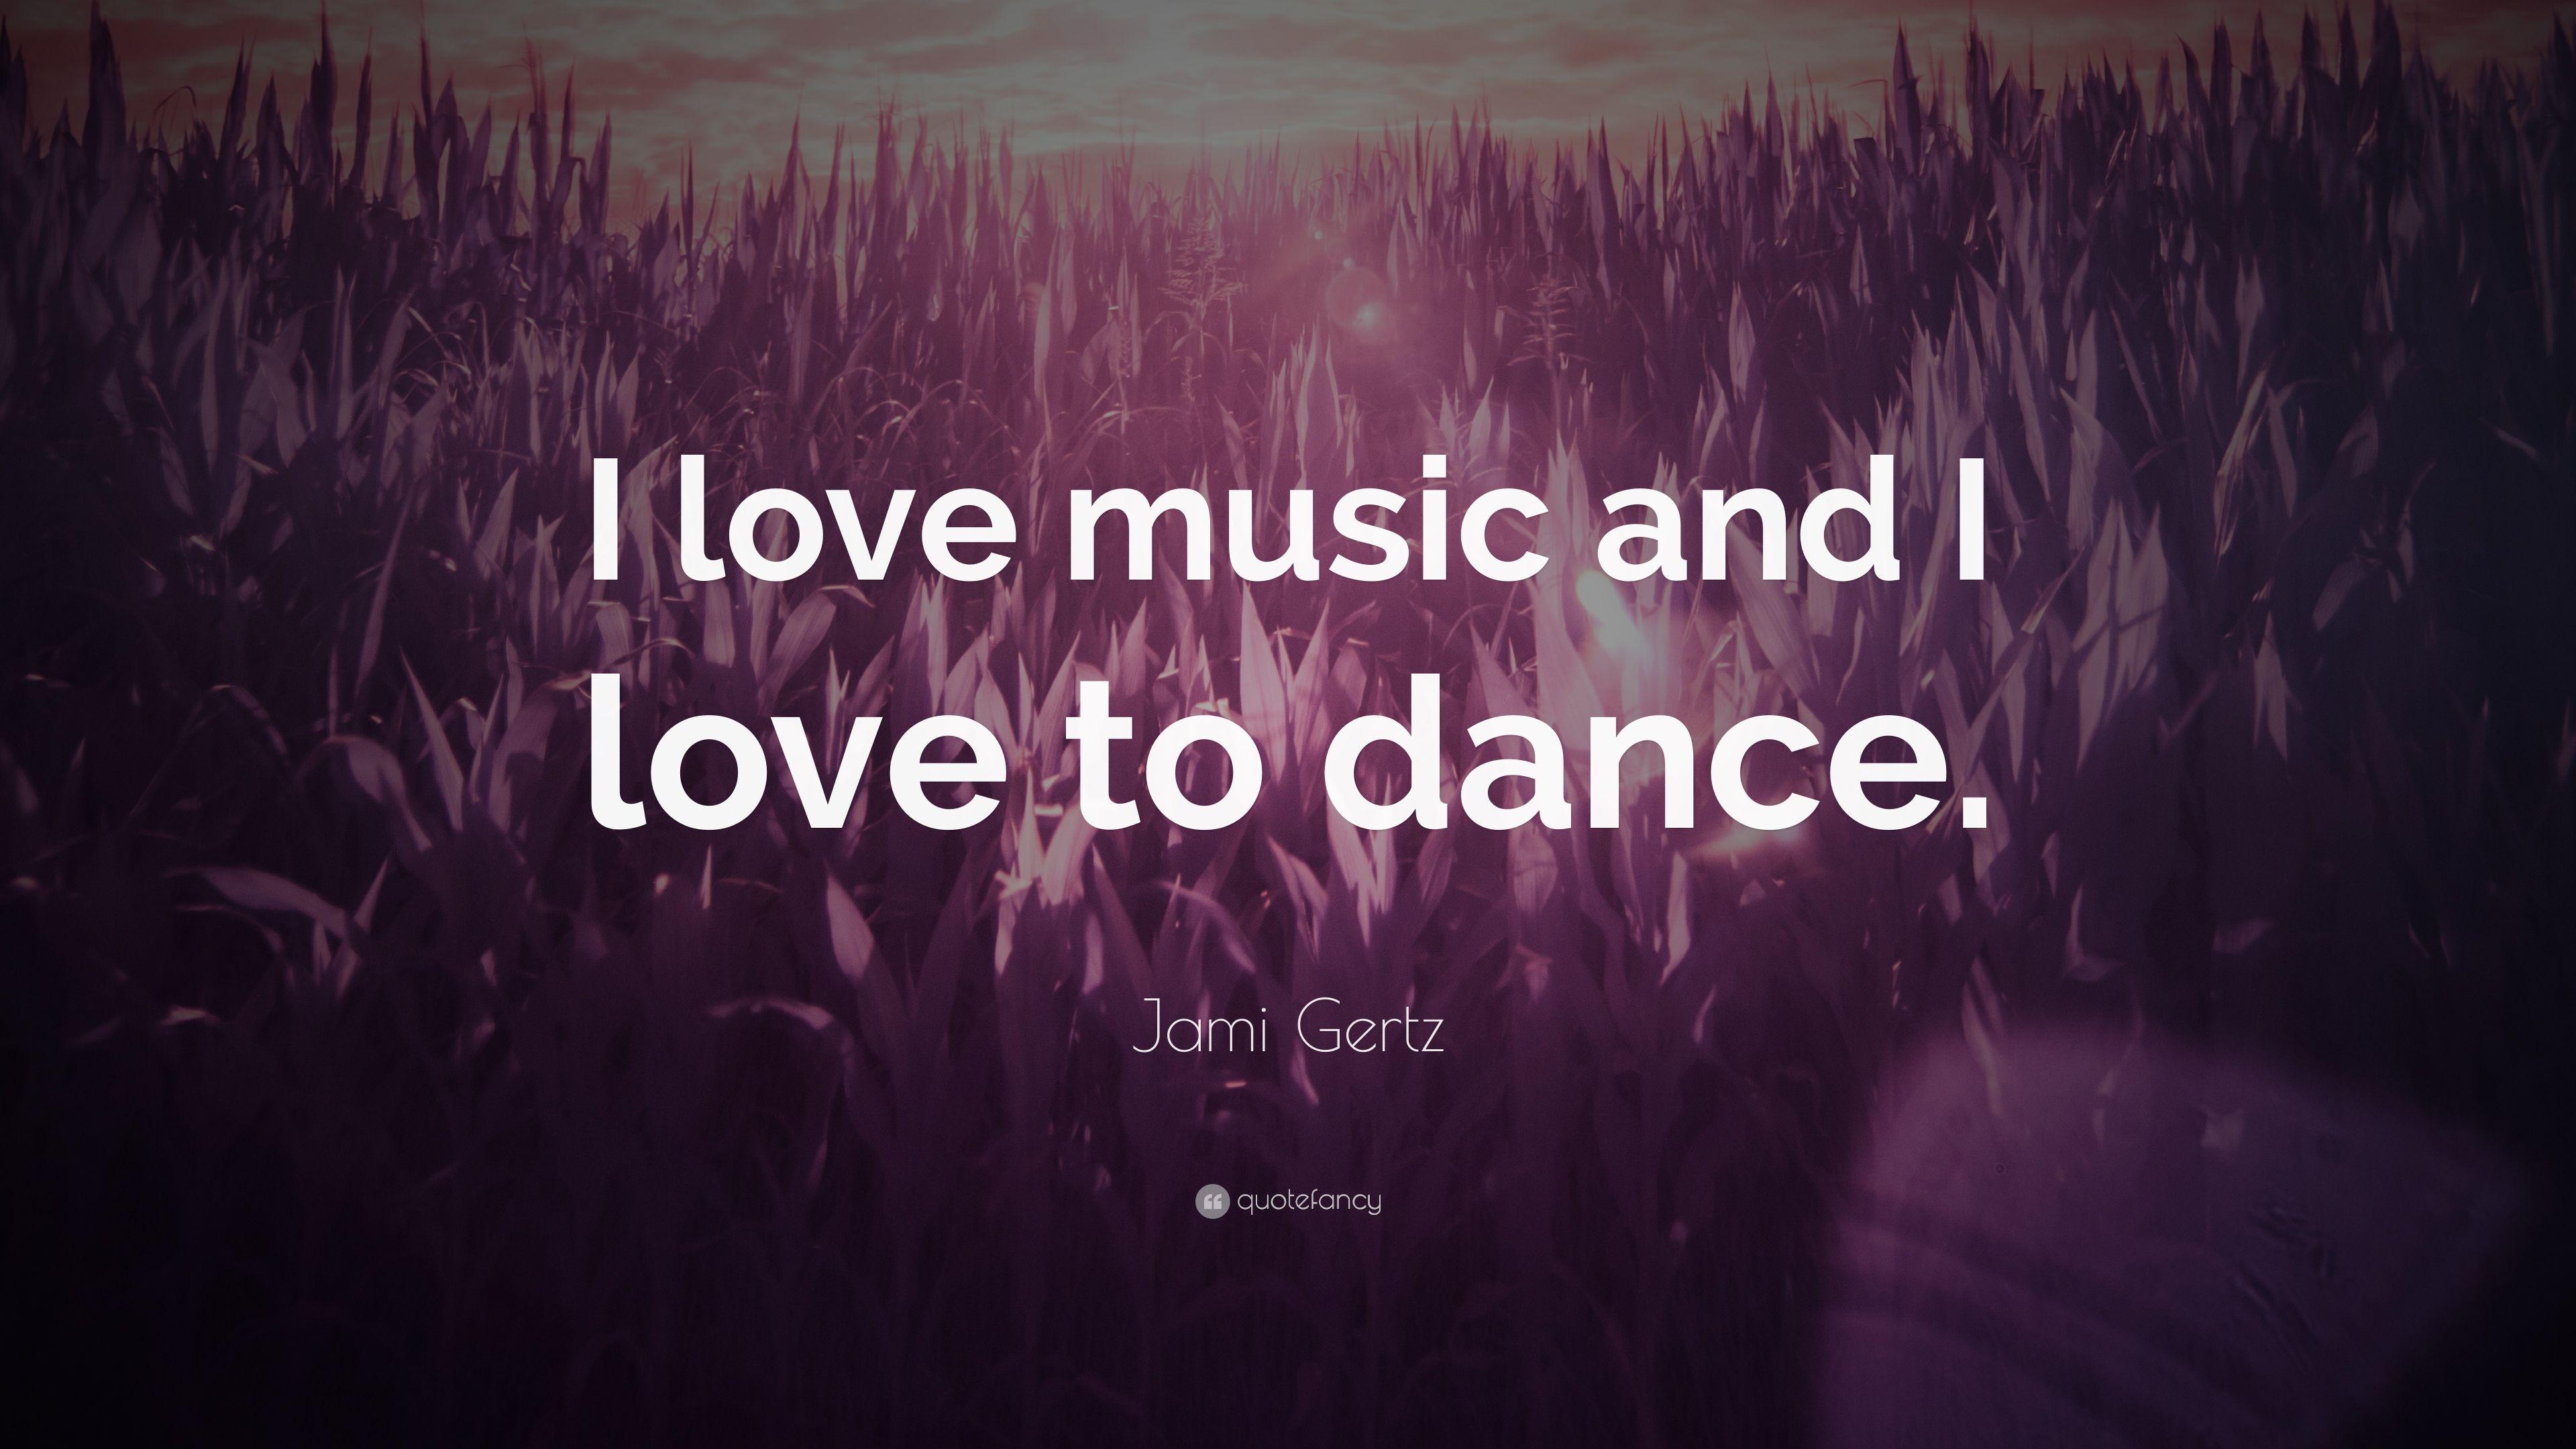 Jami Gertz Quote: “I love music and I love to dance.” 7